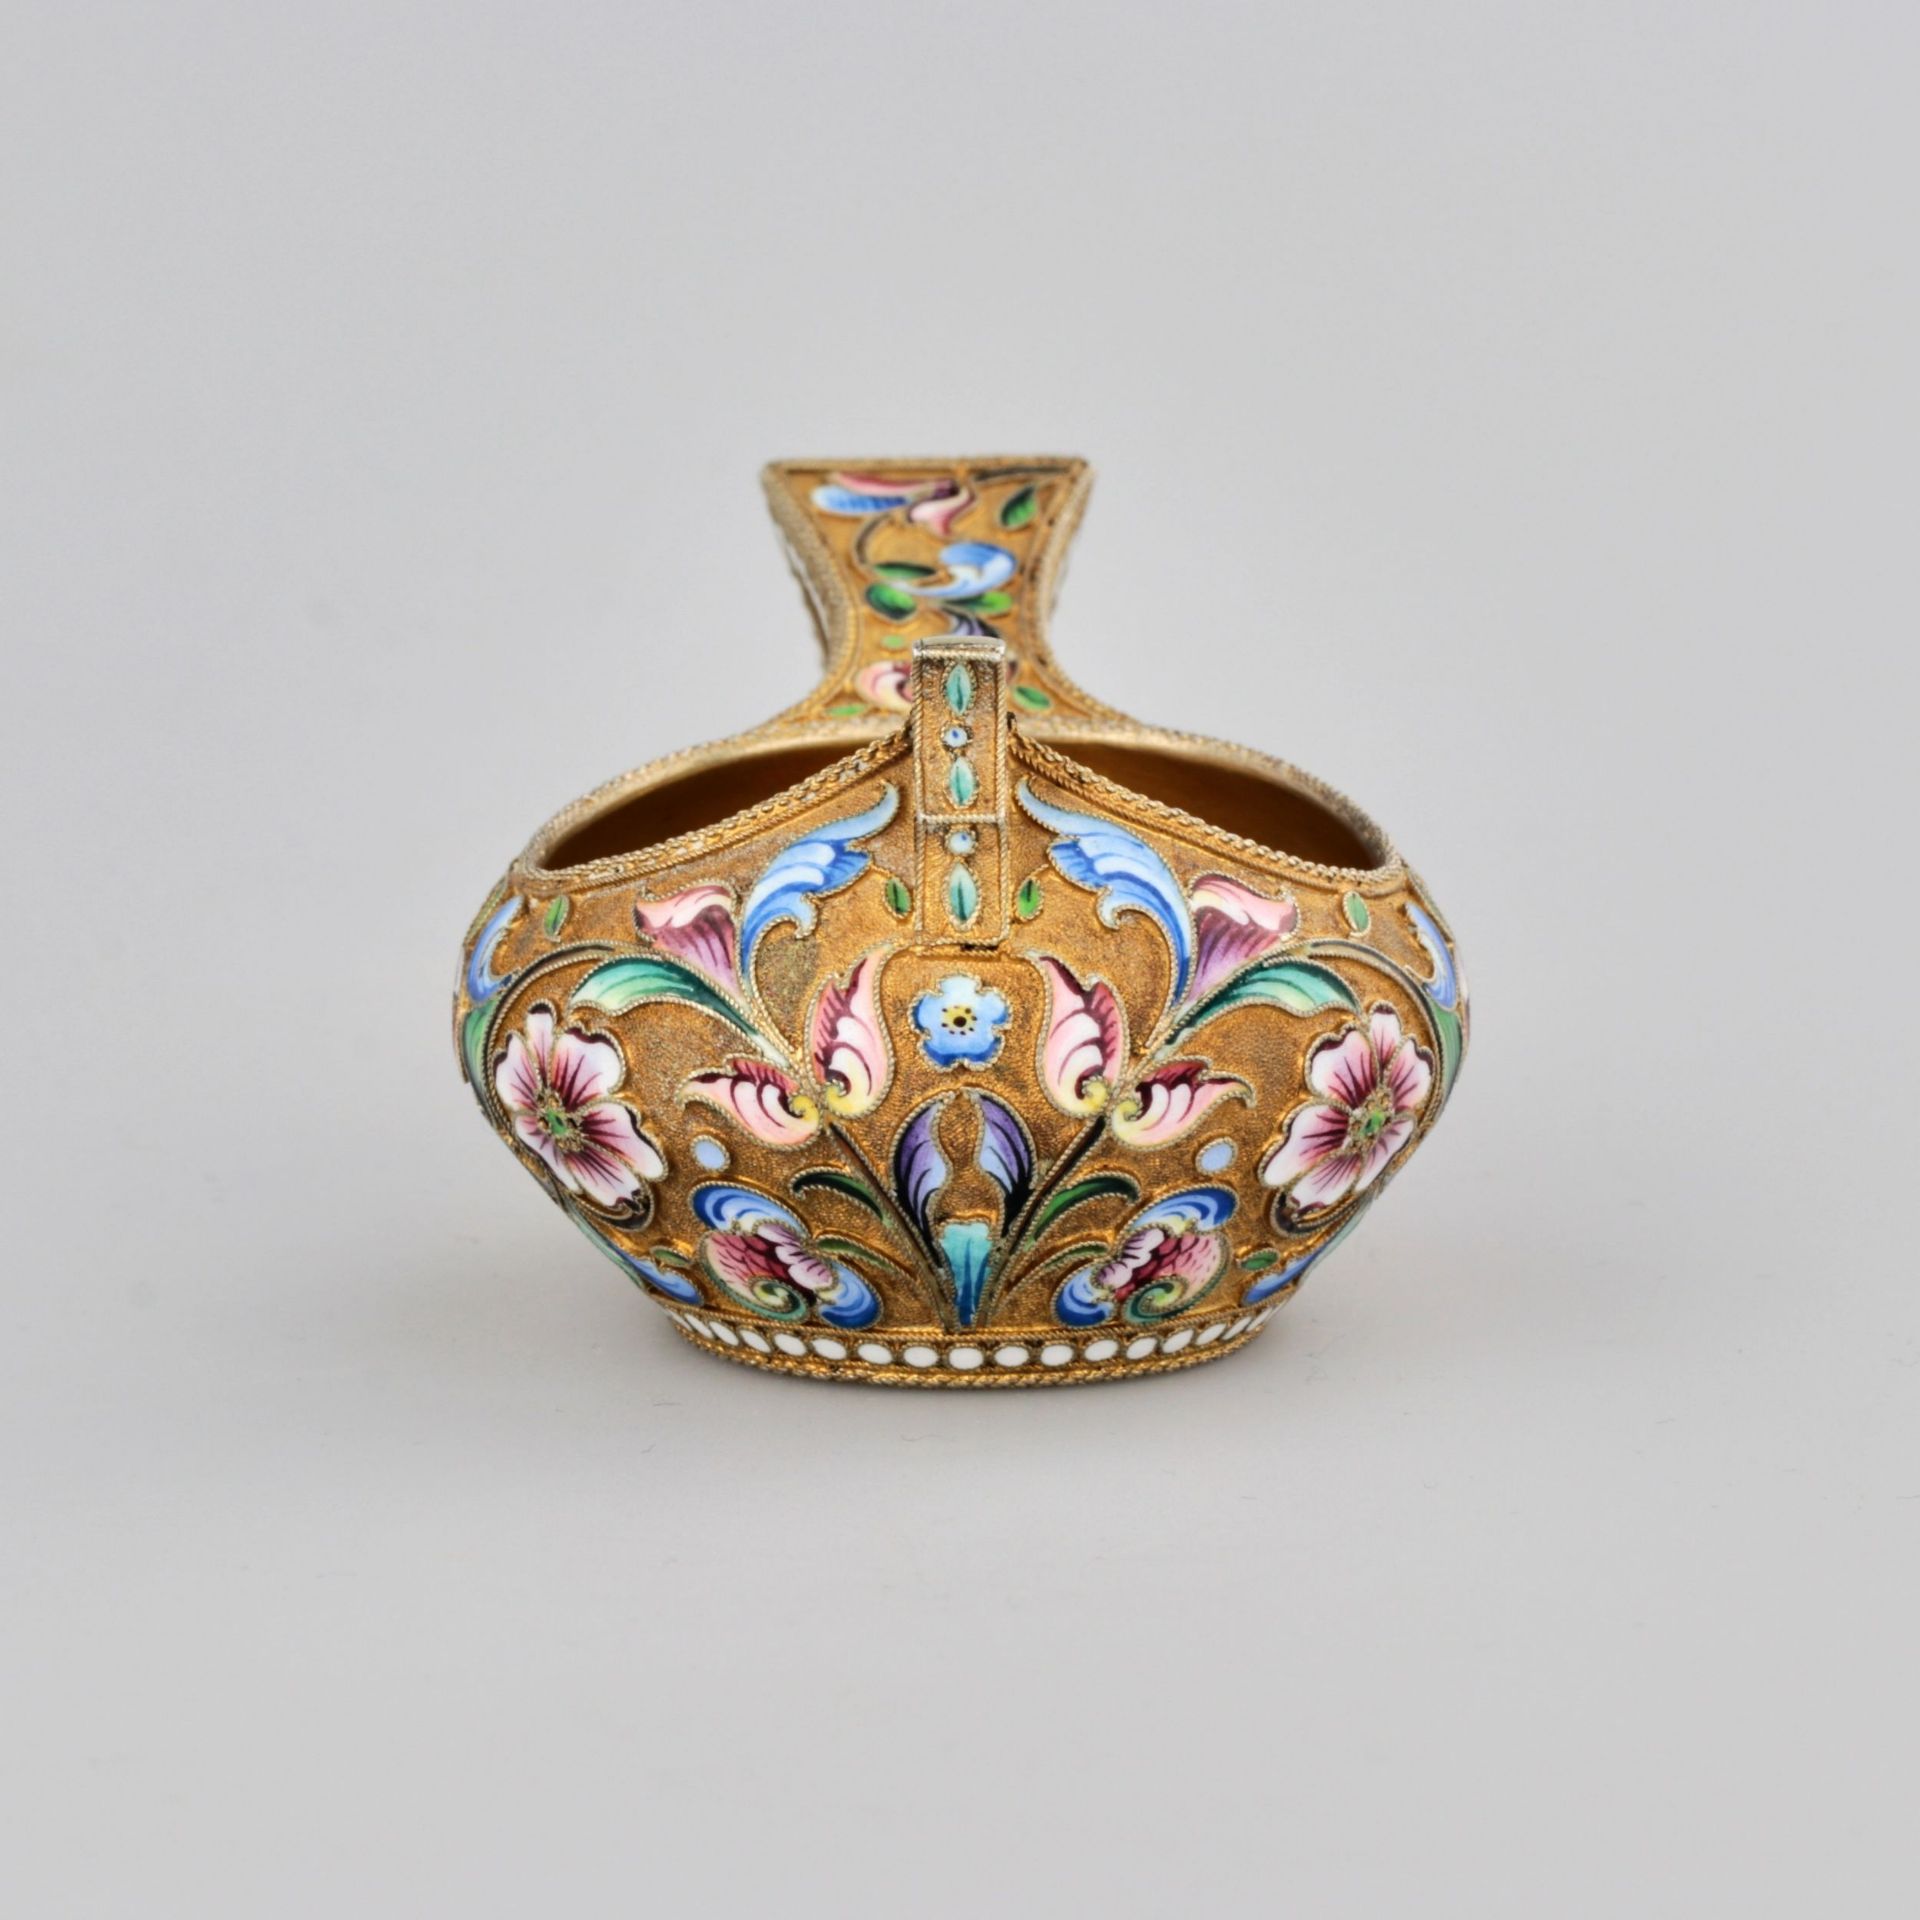 Decorative kovsh in Russian style with enamel. - Image 3 of 7